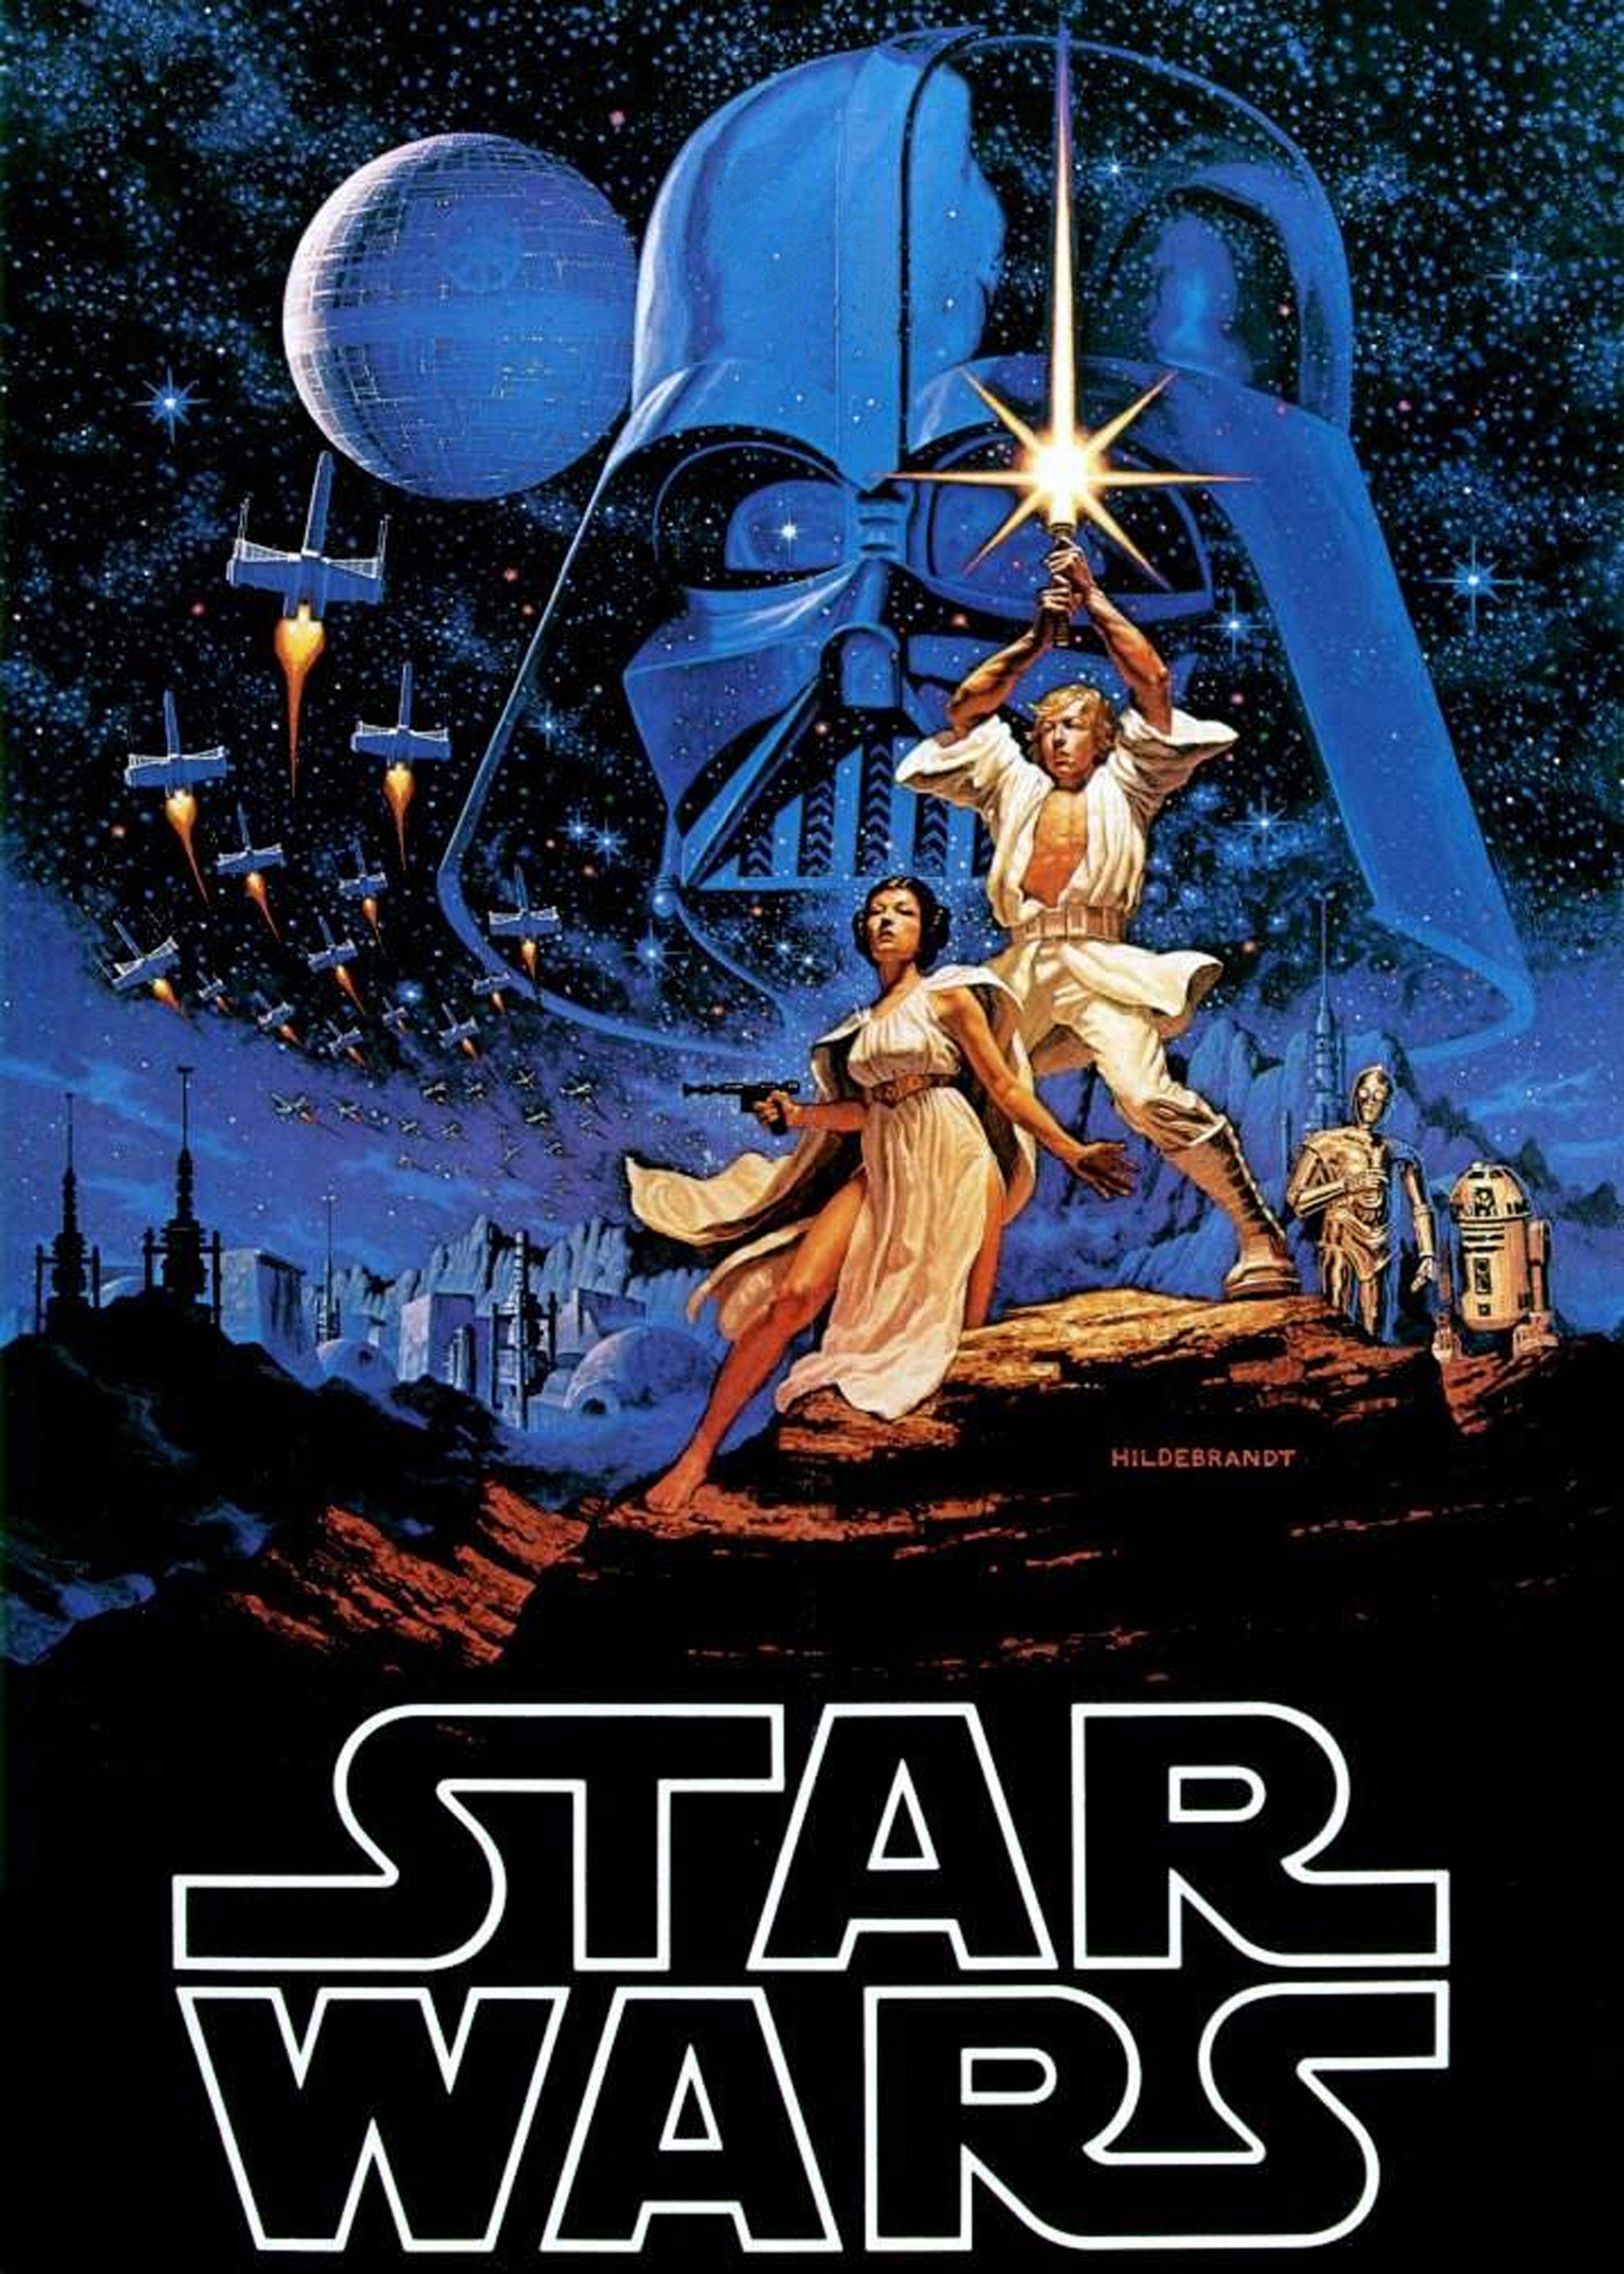 The theatrical poster for &quot;Star Wars&quot;